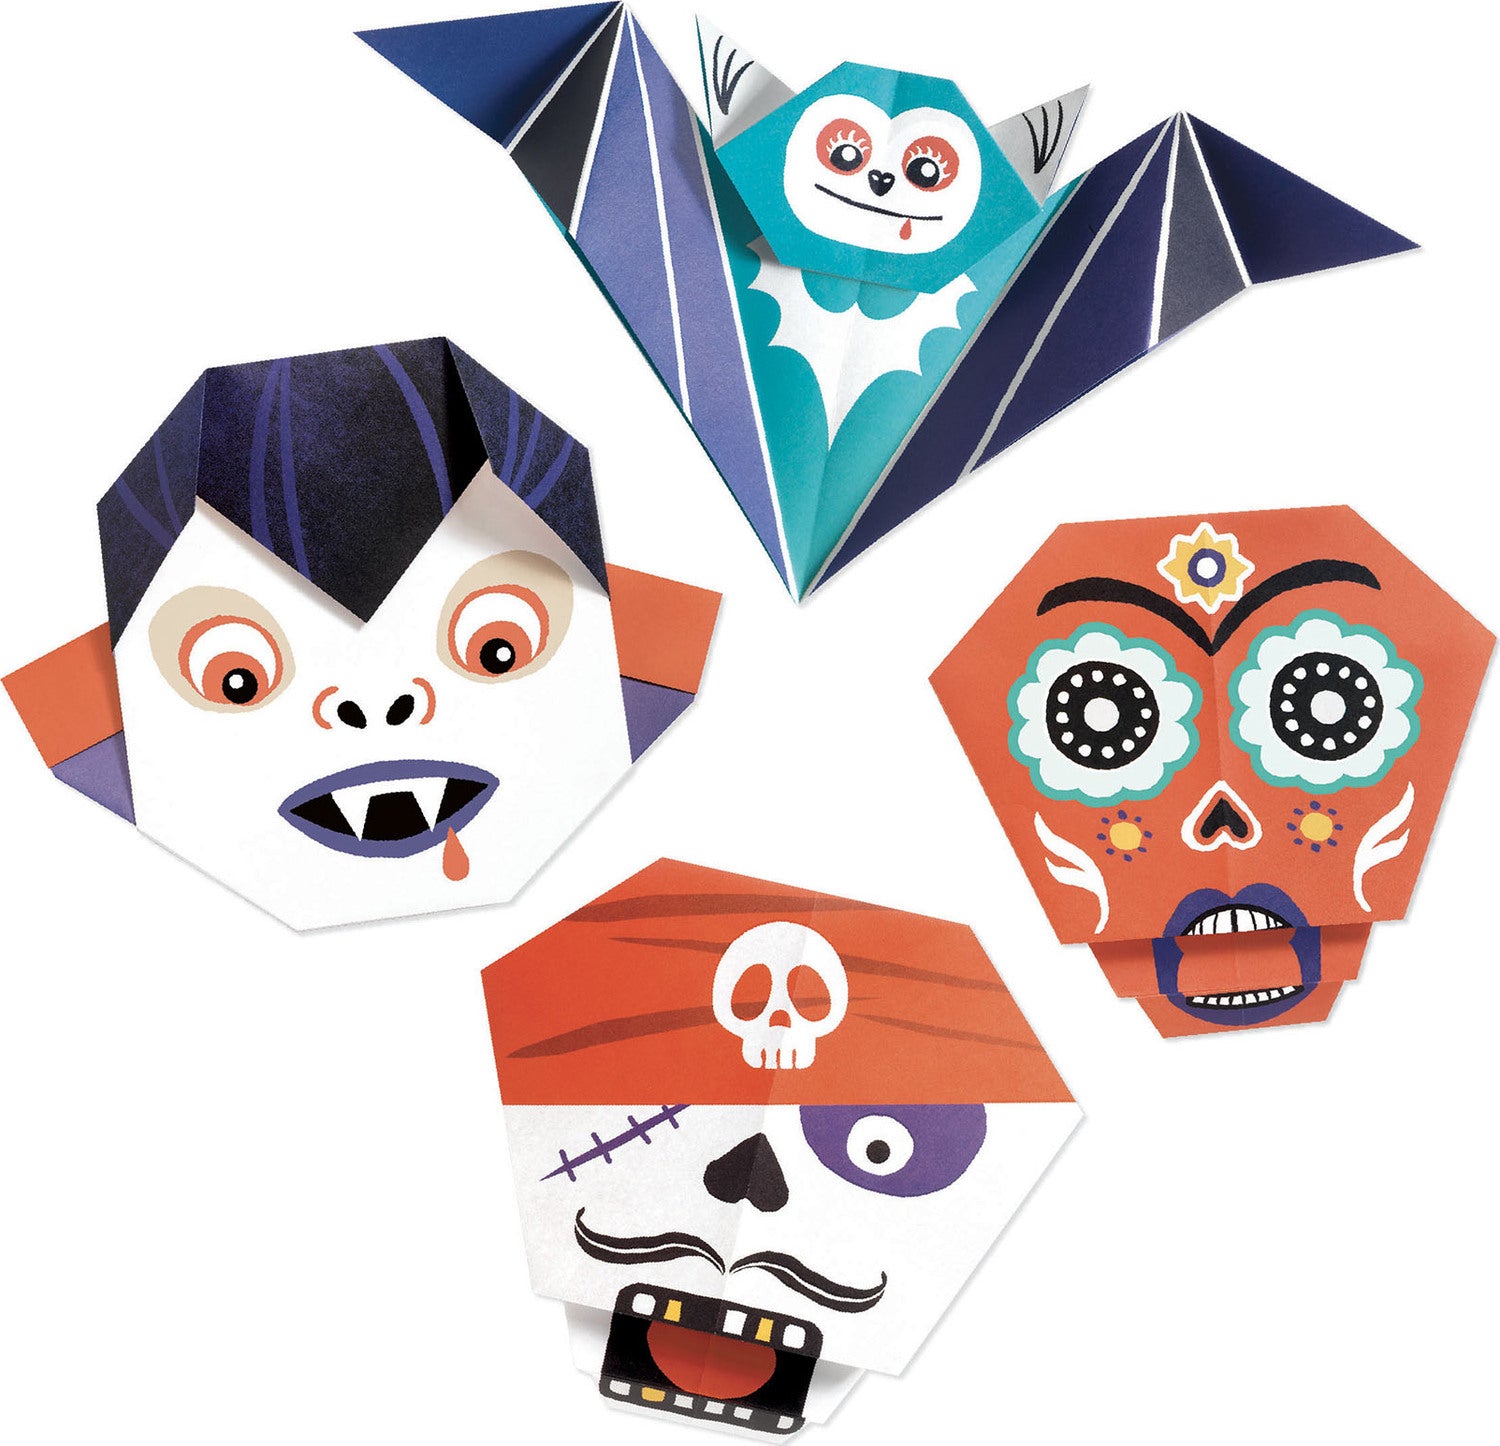 Shivers Origami Paper Craft Kit